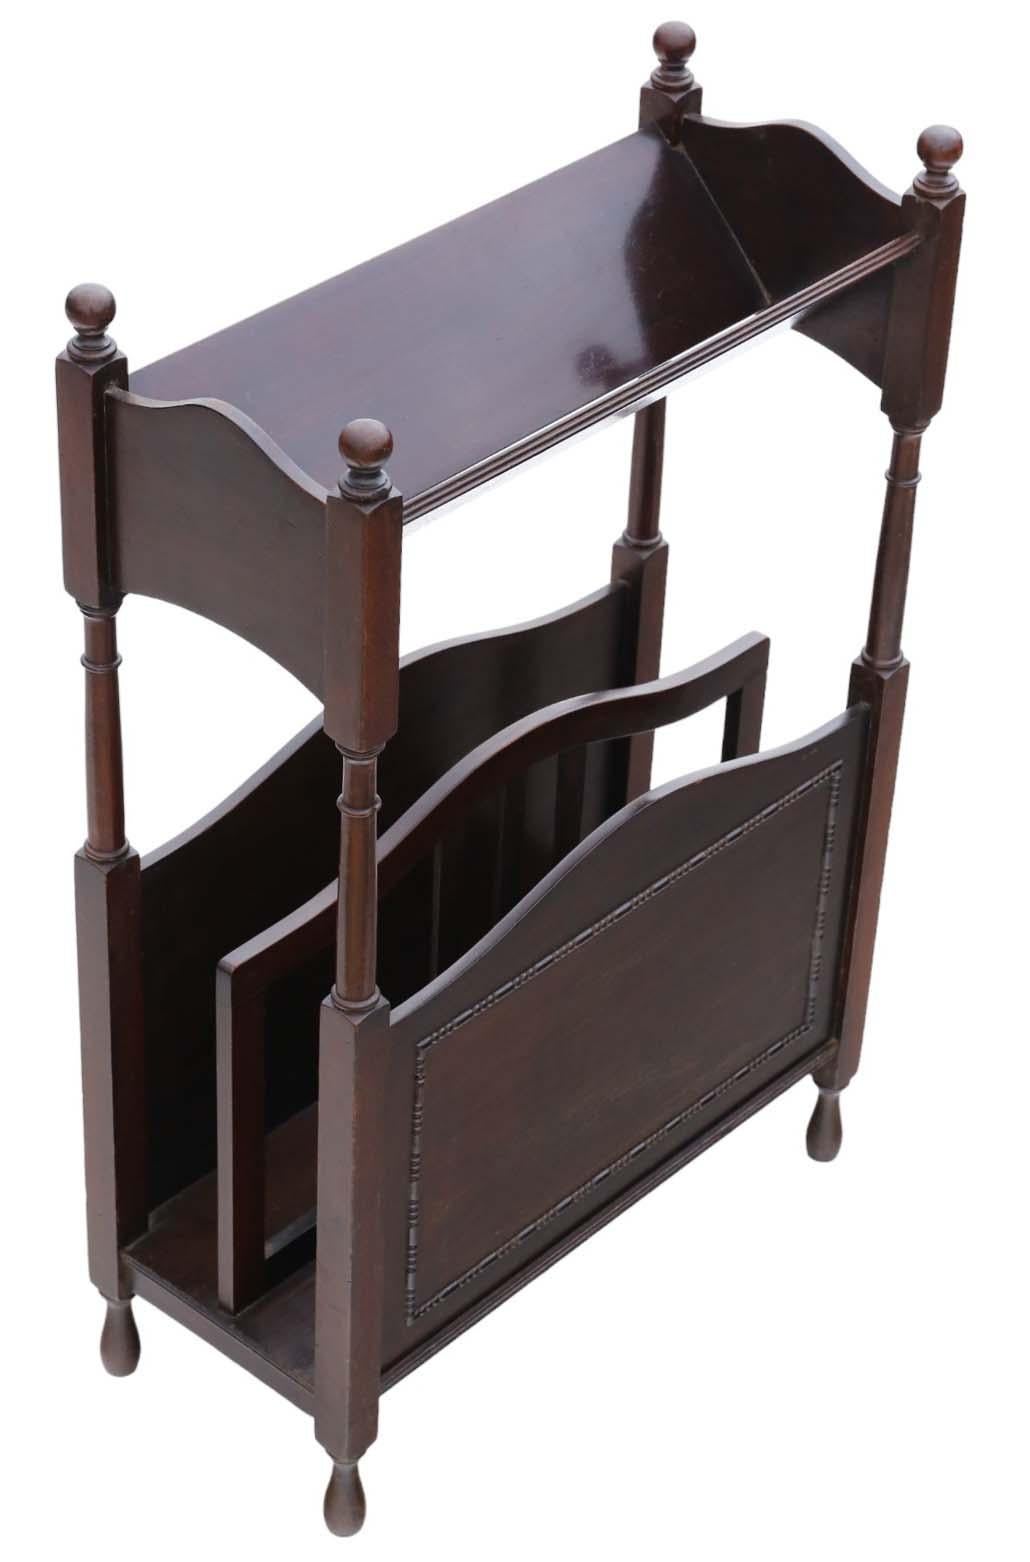 Antique Art Nouveau Mahogany Bookcase - Quality Book Trough Magazine Stand C1920 In Good Condition For Sale In Wisbech, Cambridgeshire